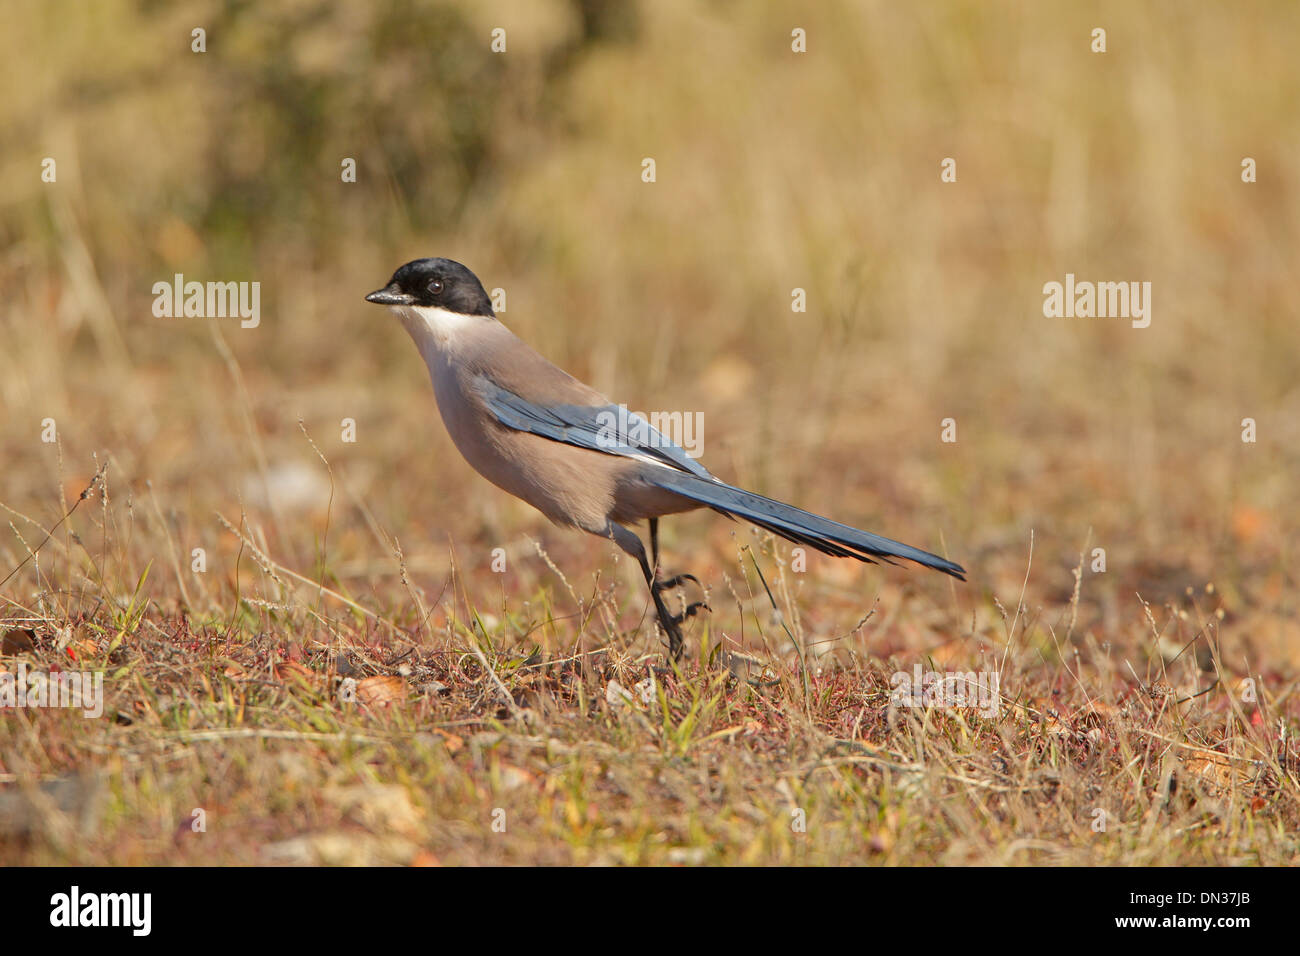 Azure-winged Magpie taking off Banque D'Images